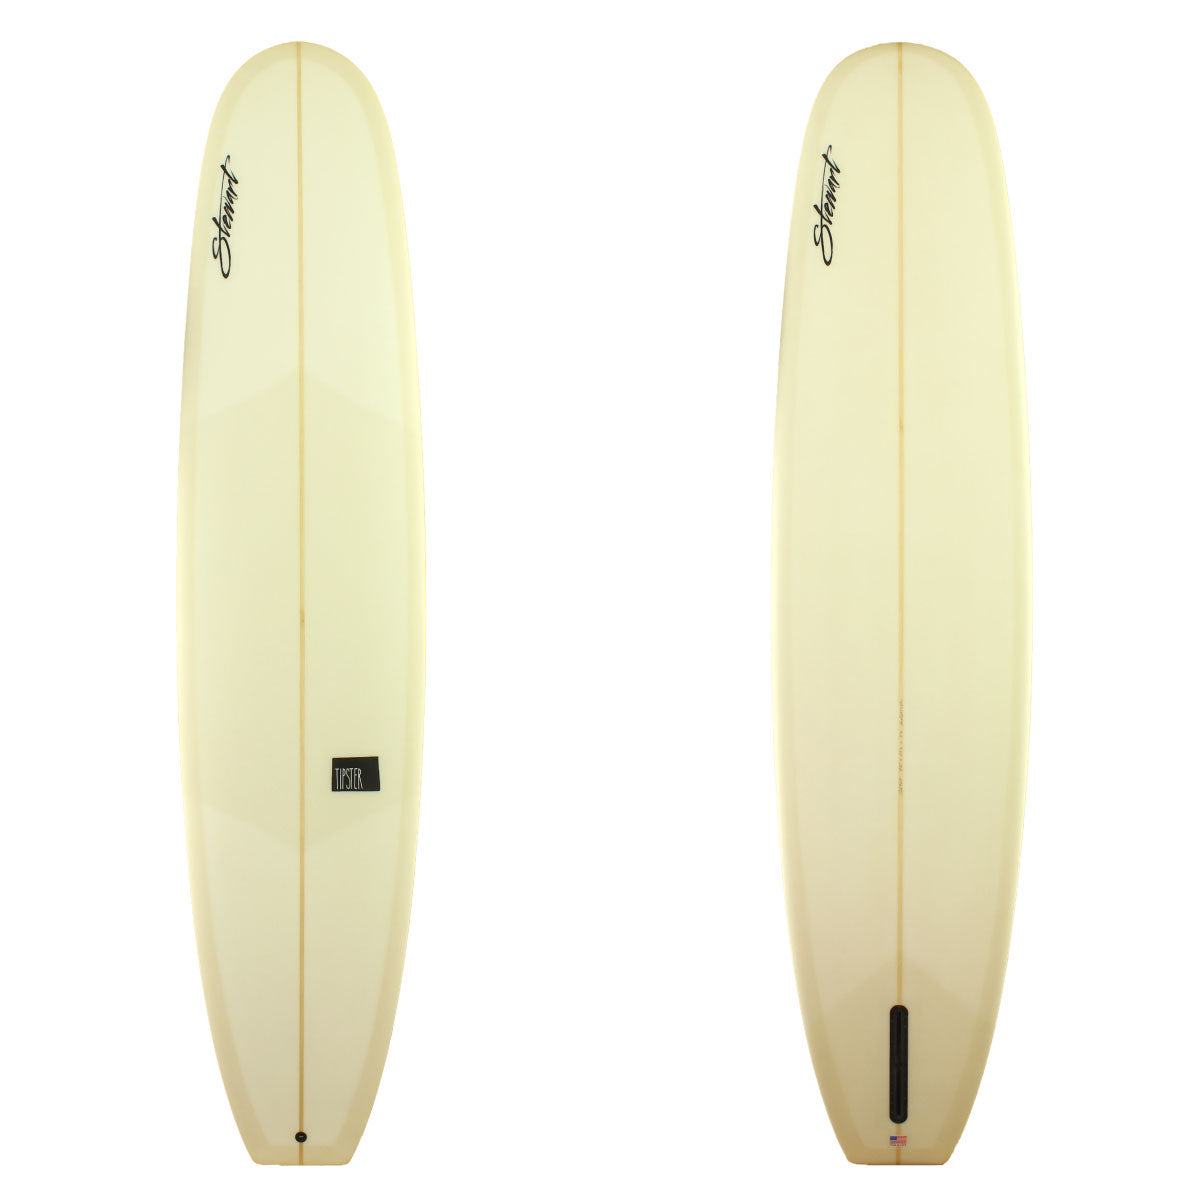 Stewart Surfboards 9'6 TIPSTER with butter yellow resin tint deck and bottom